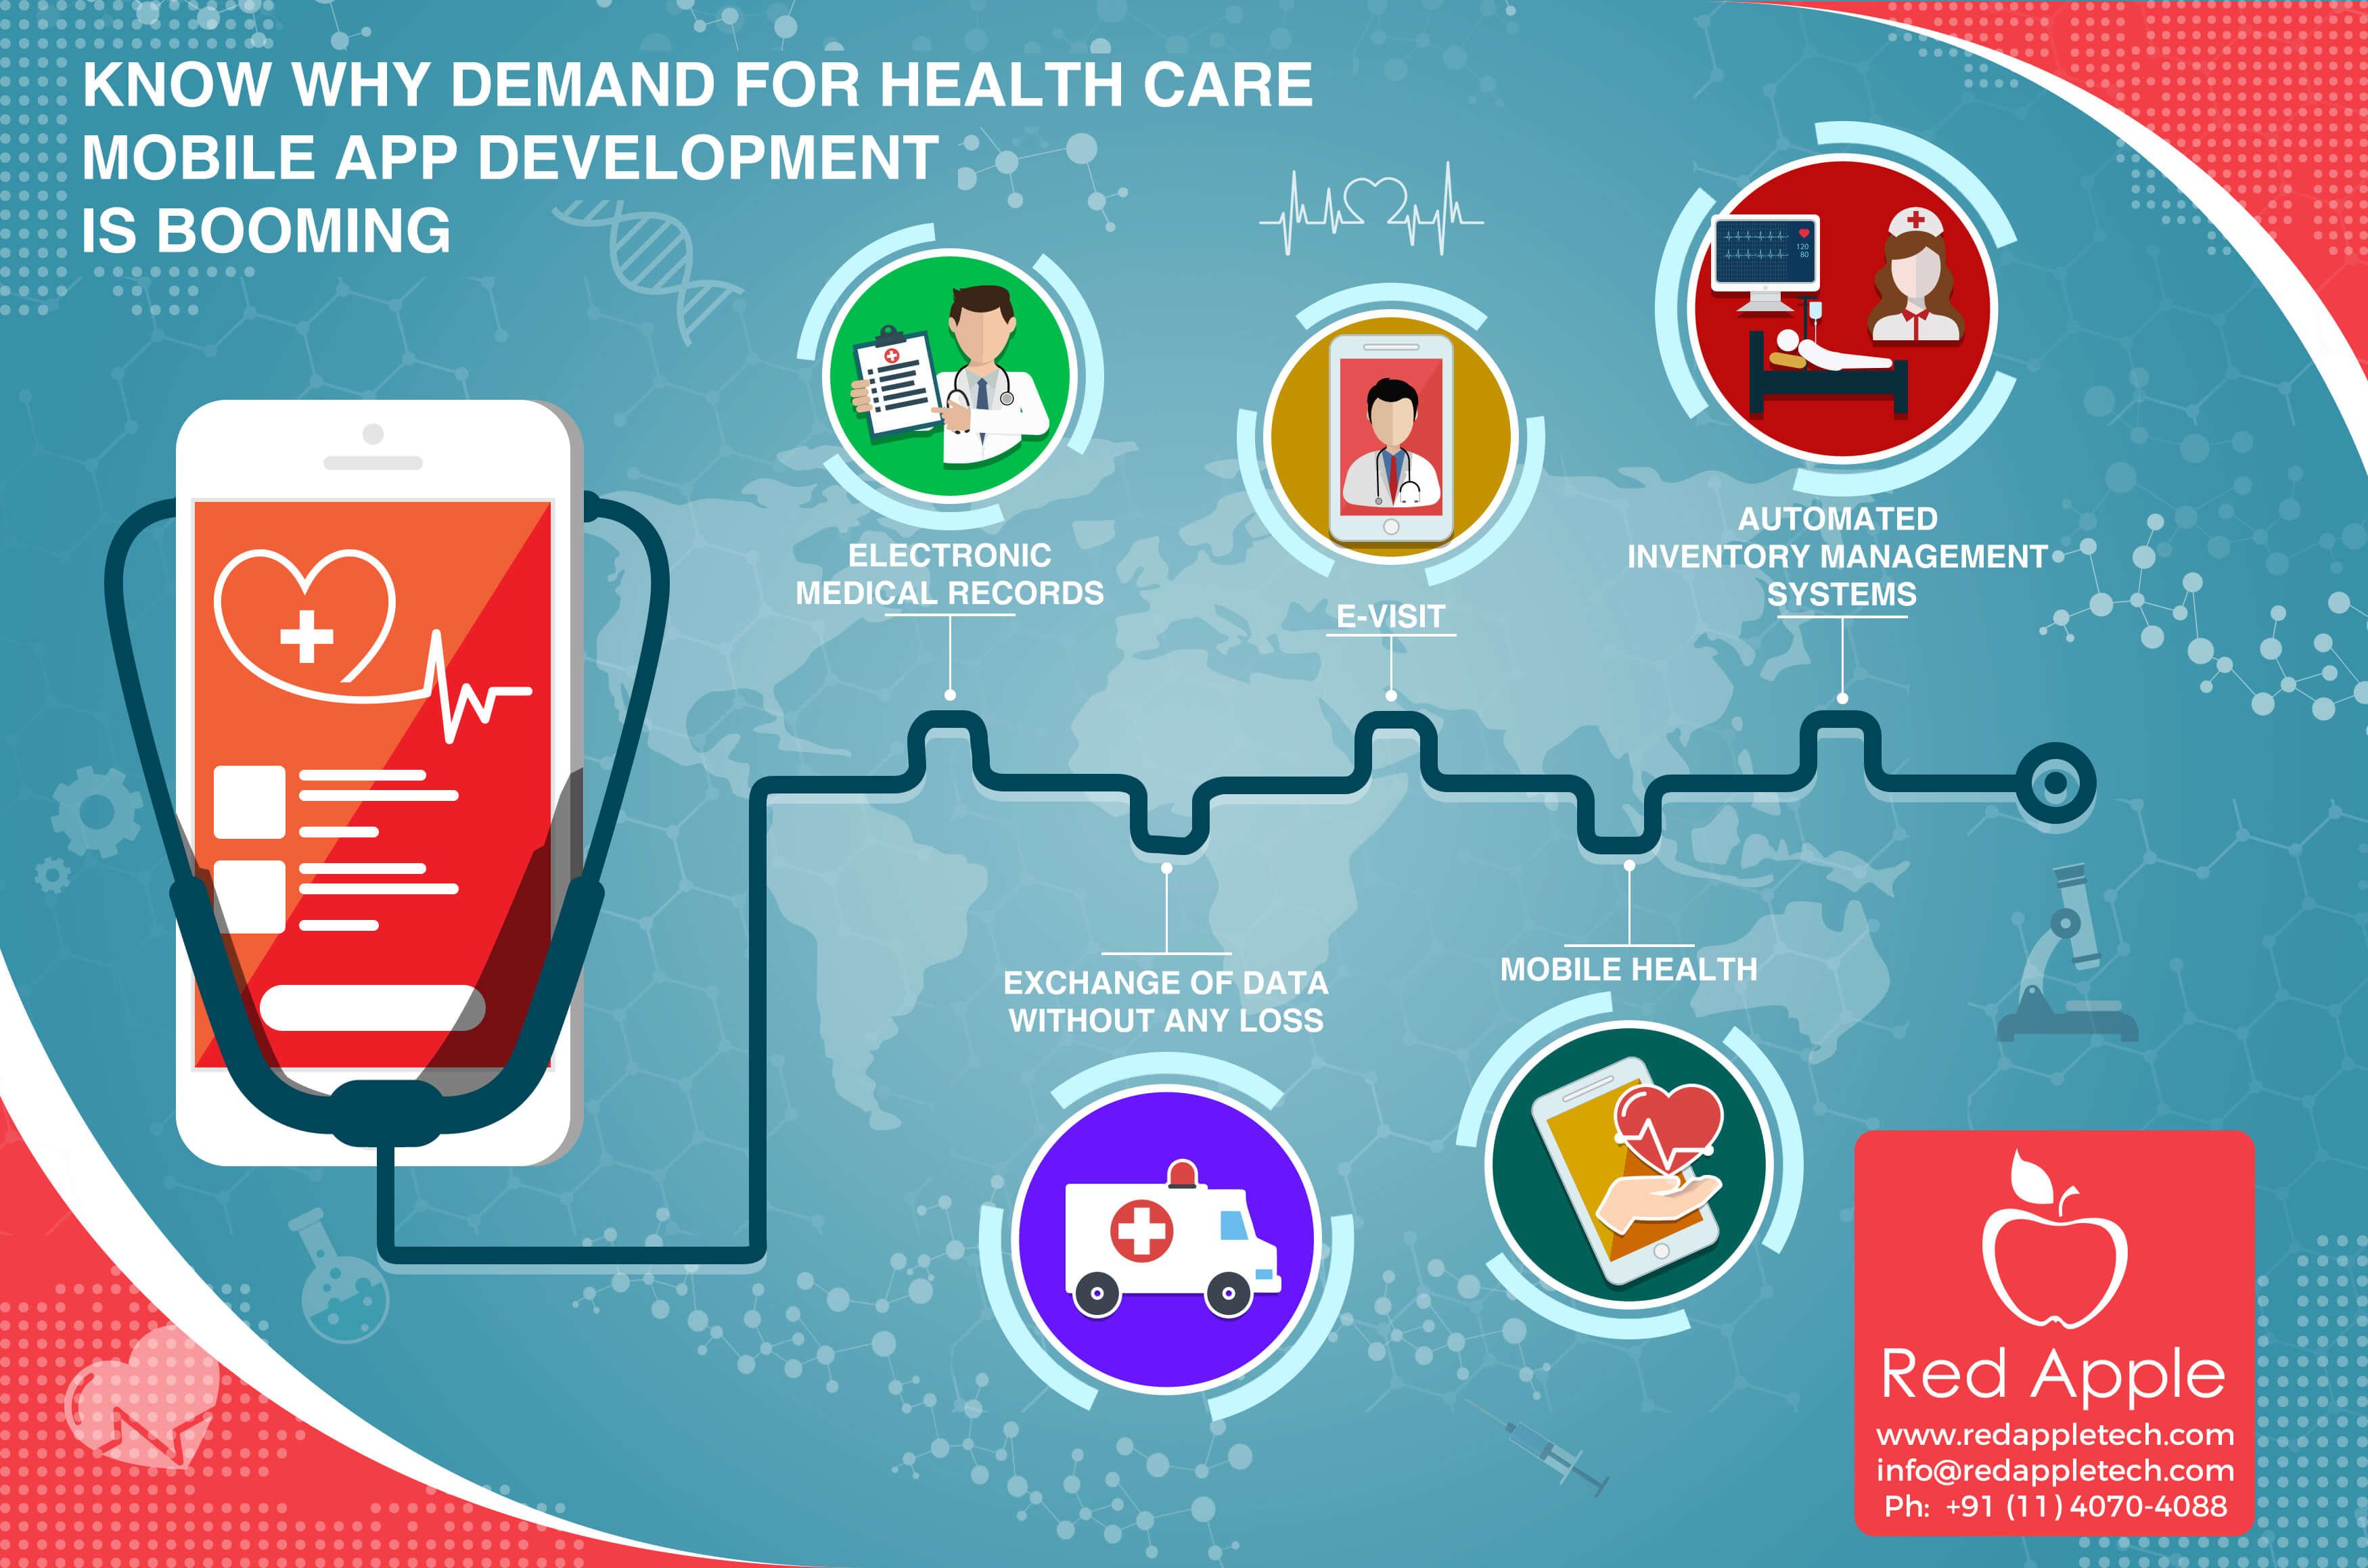 Medicine App Mobile Logo - Know Why Demand for Health Care Mobile App Development is Booming